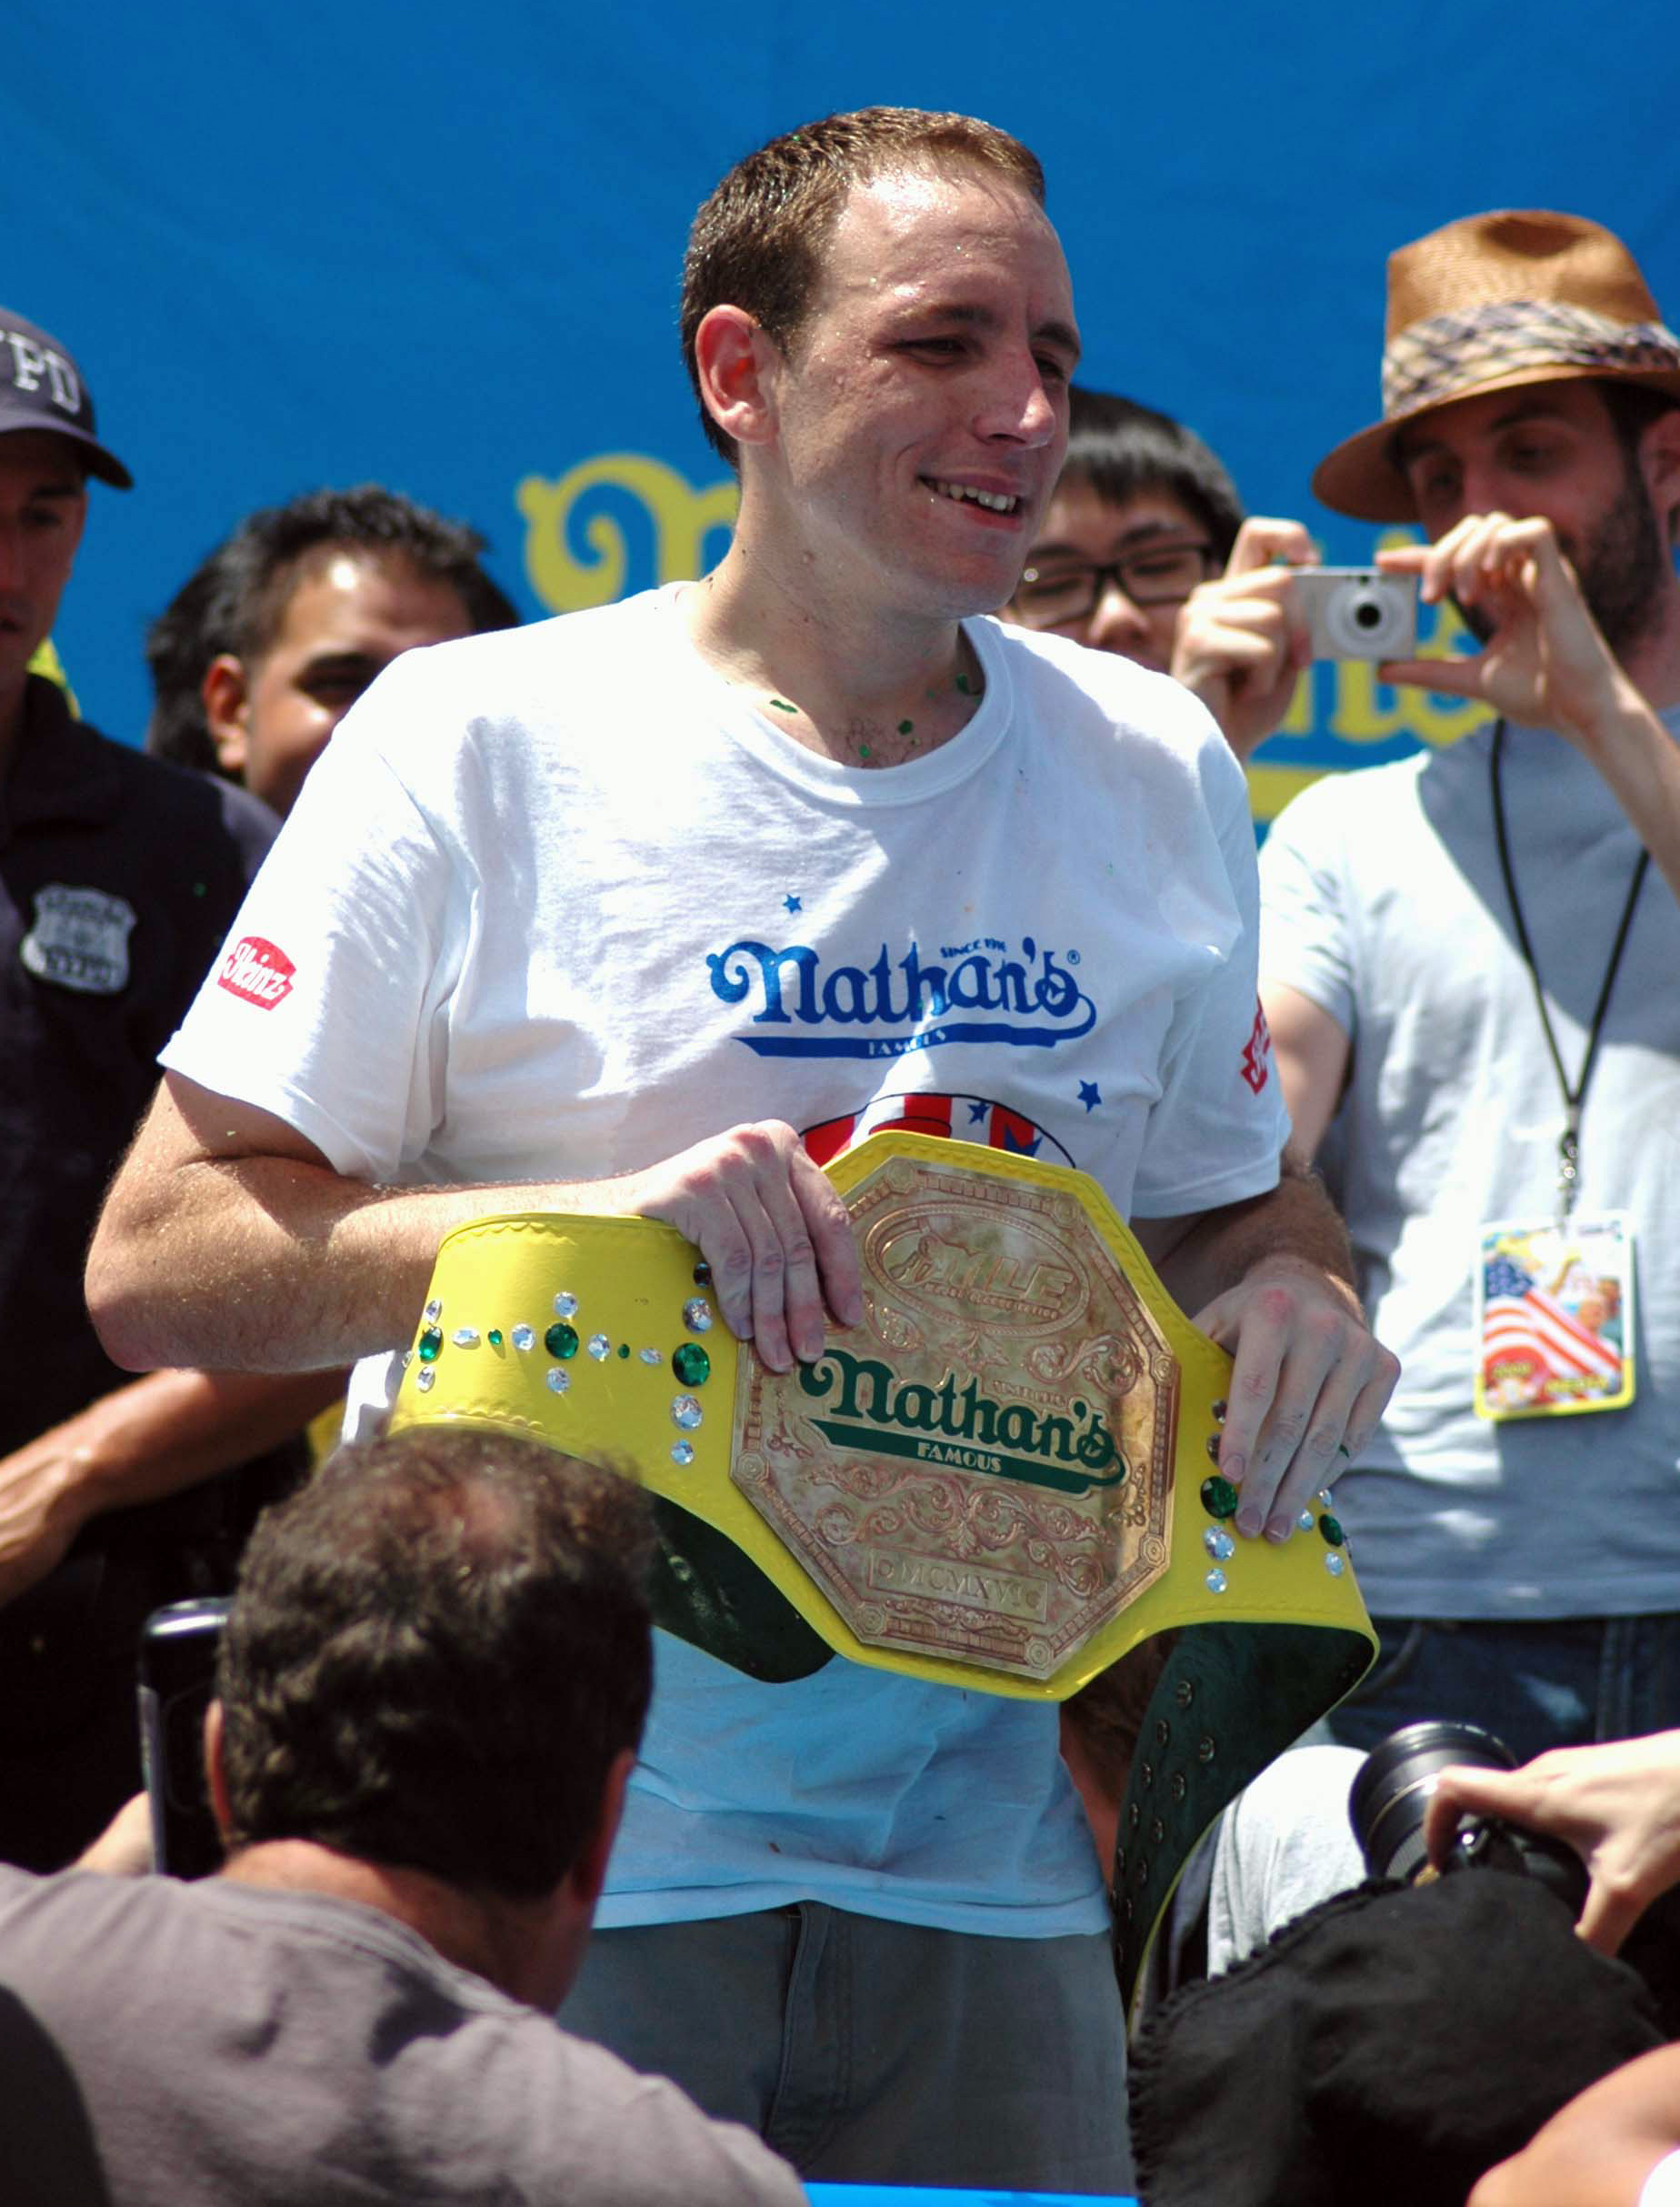 Joey Chestnut with trophy